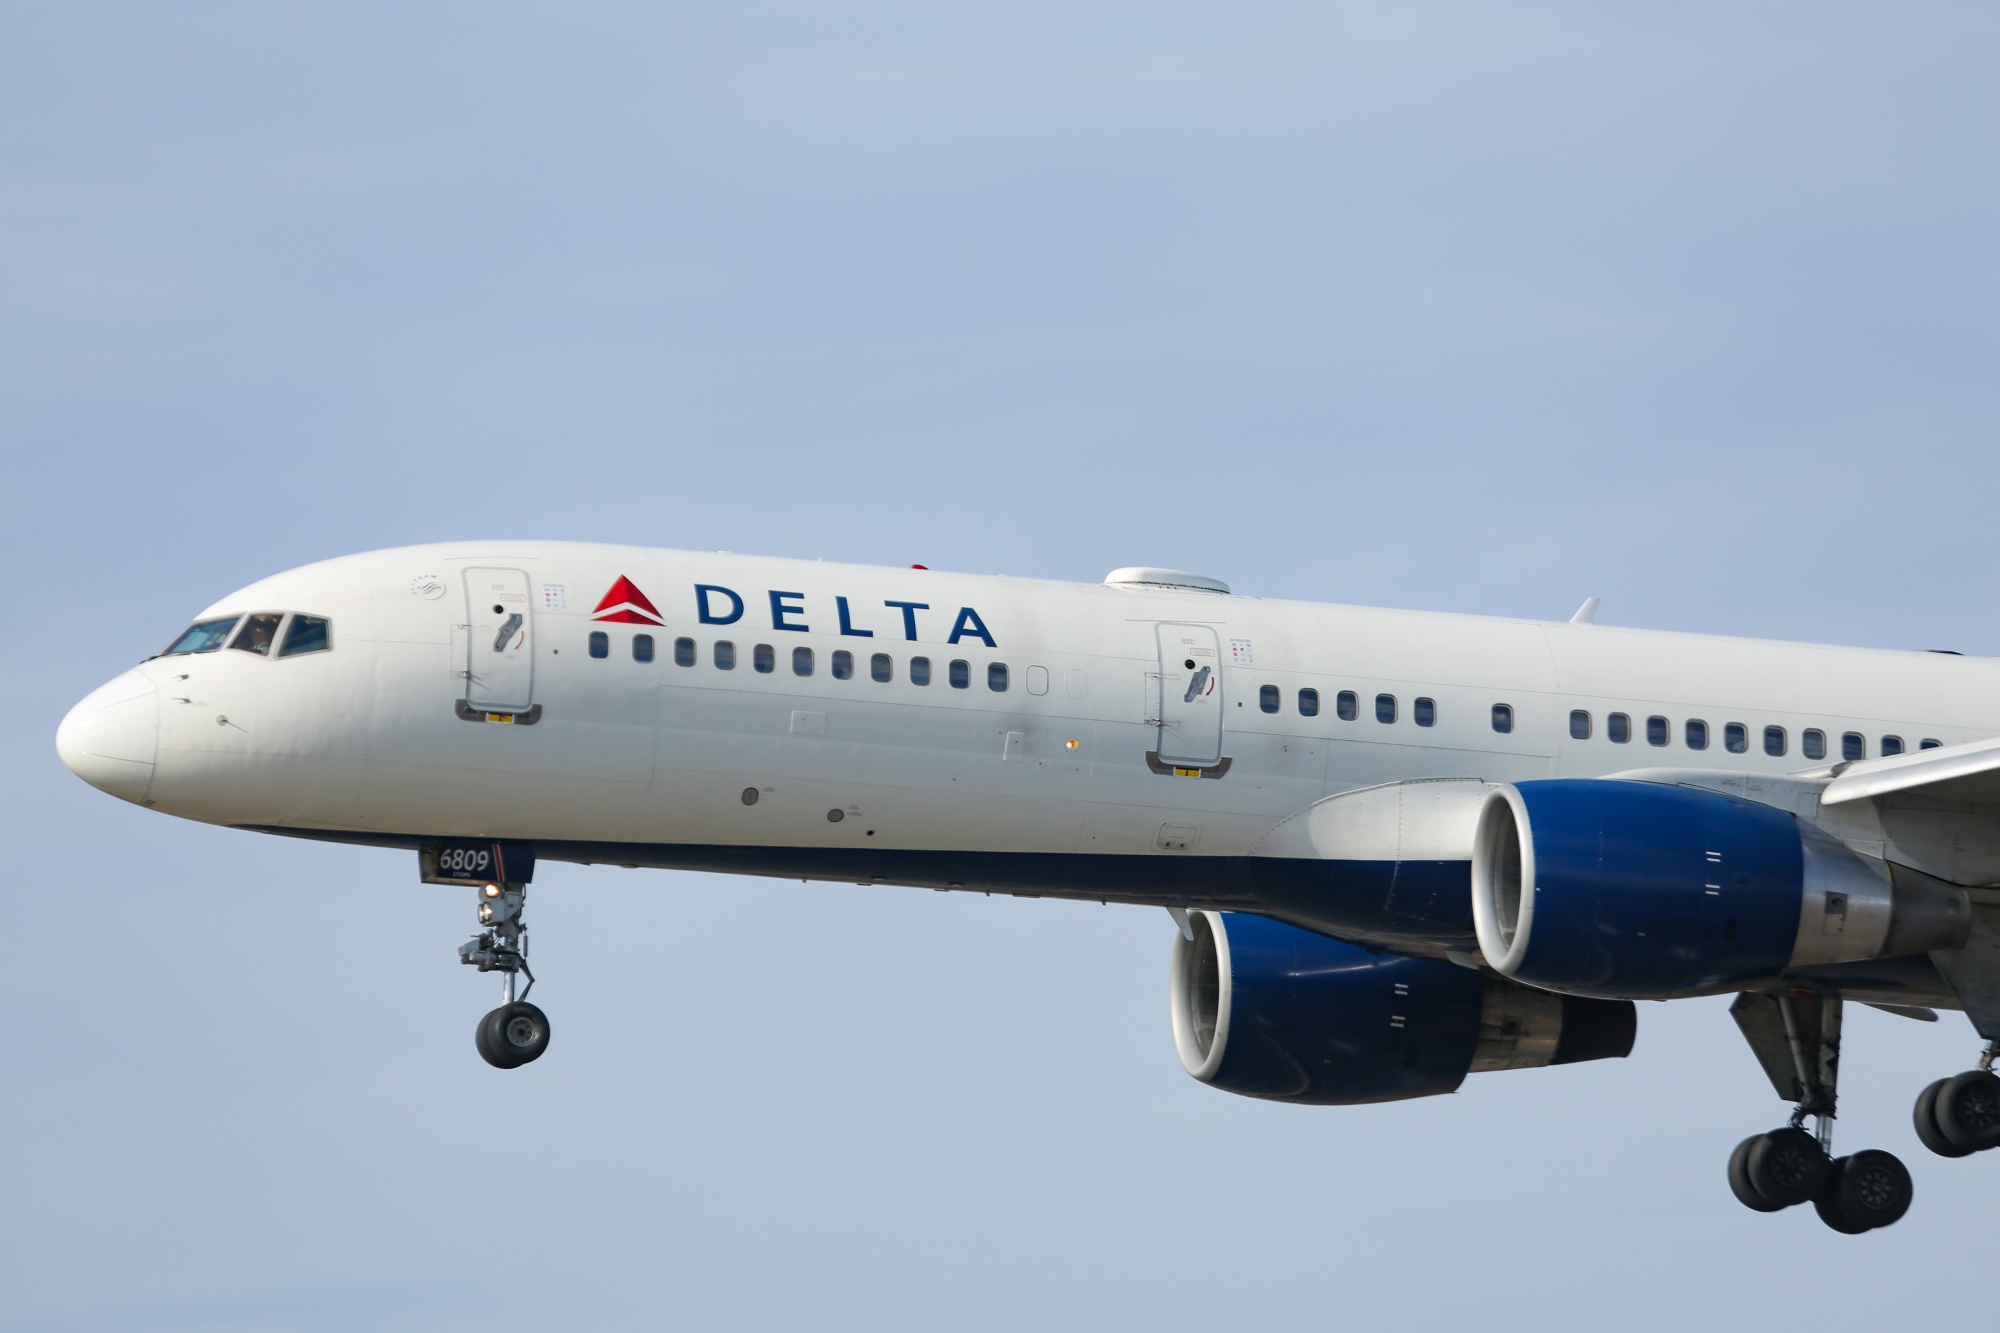 Delta was sued over its carbon offset claims. It's not the only company  misleading us about its emissions reduction efforts.